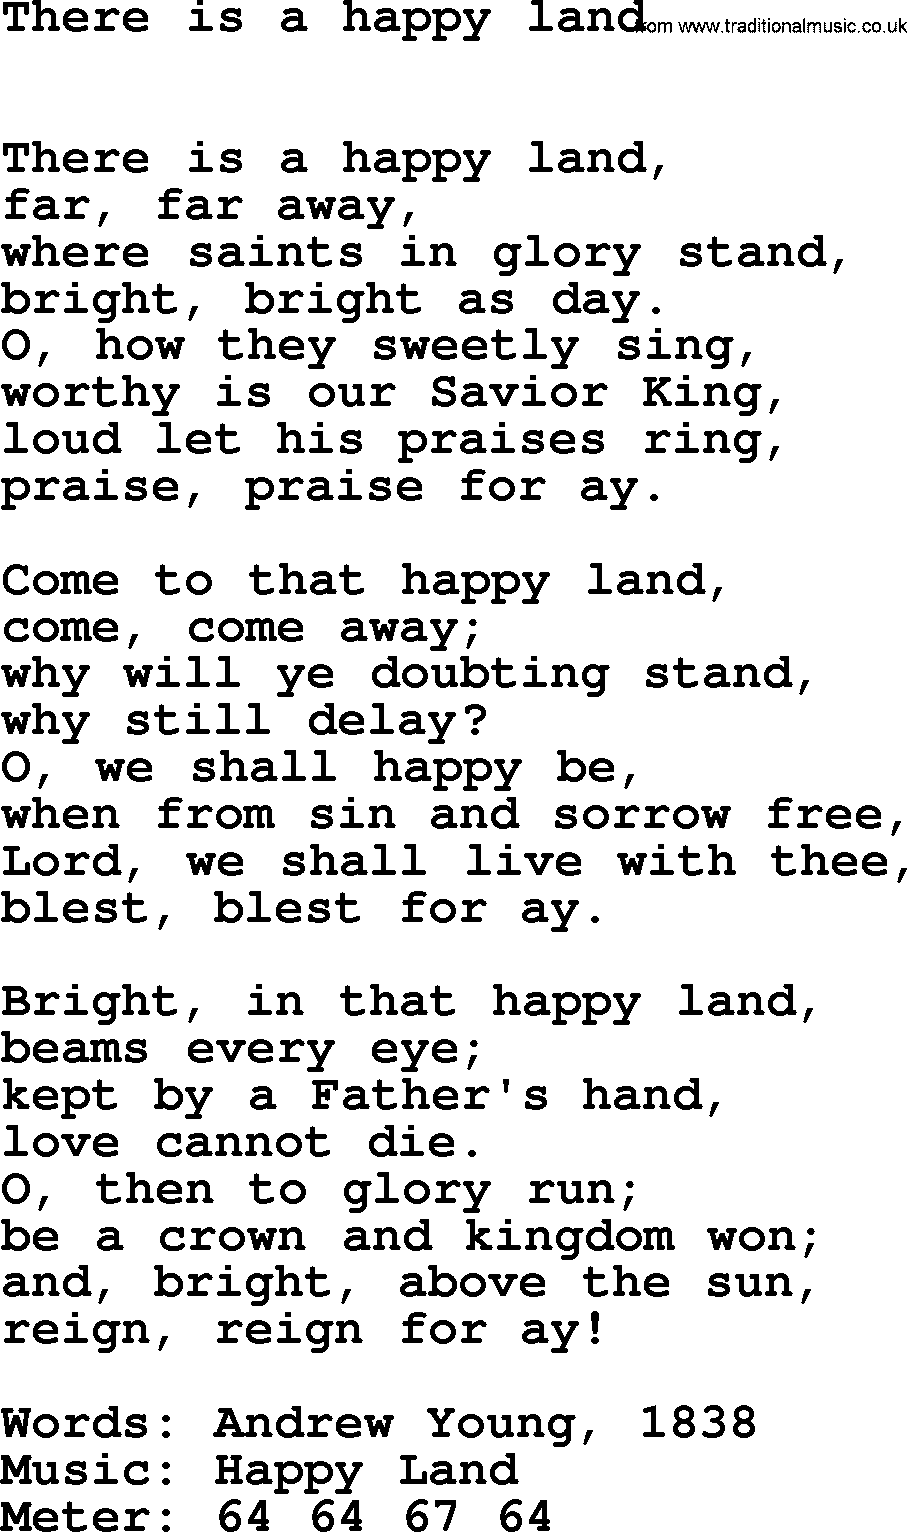 Book of Common Praise Hymn: There Is A Happy Land.txt lyrics with midi music